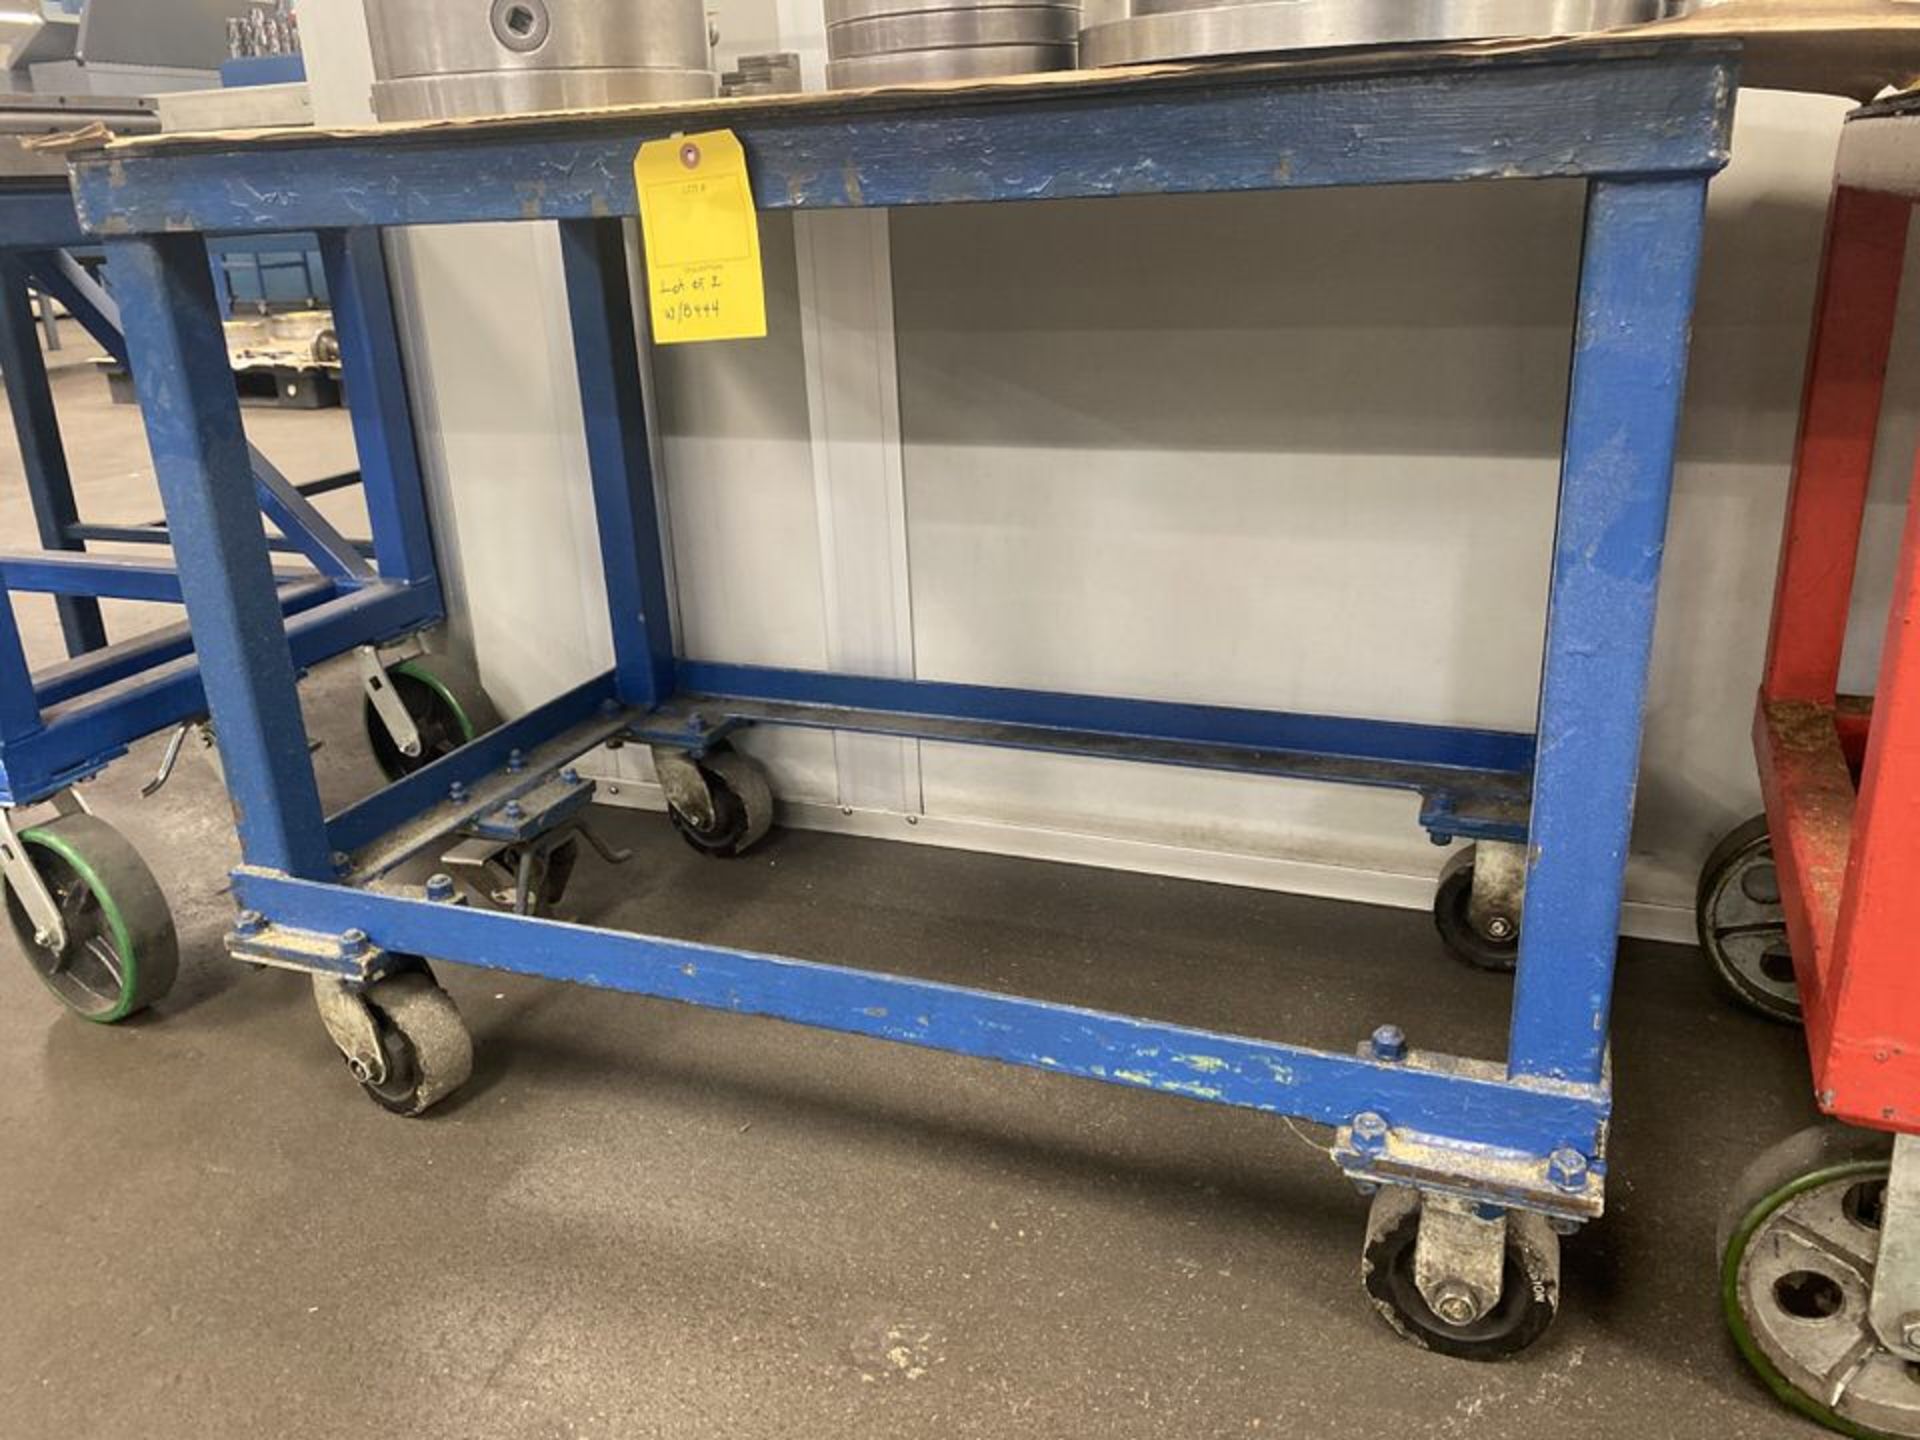 Lot of 2 Rolling Shop Carts - Image 2 of 2